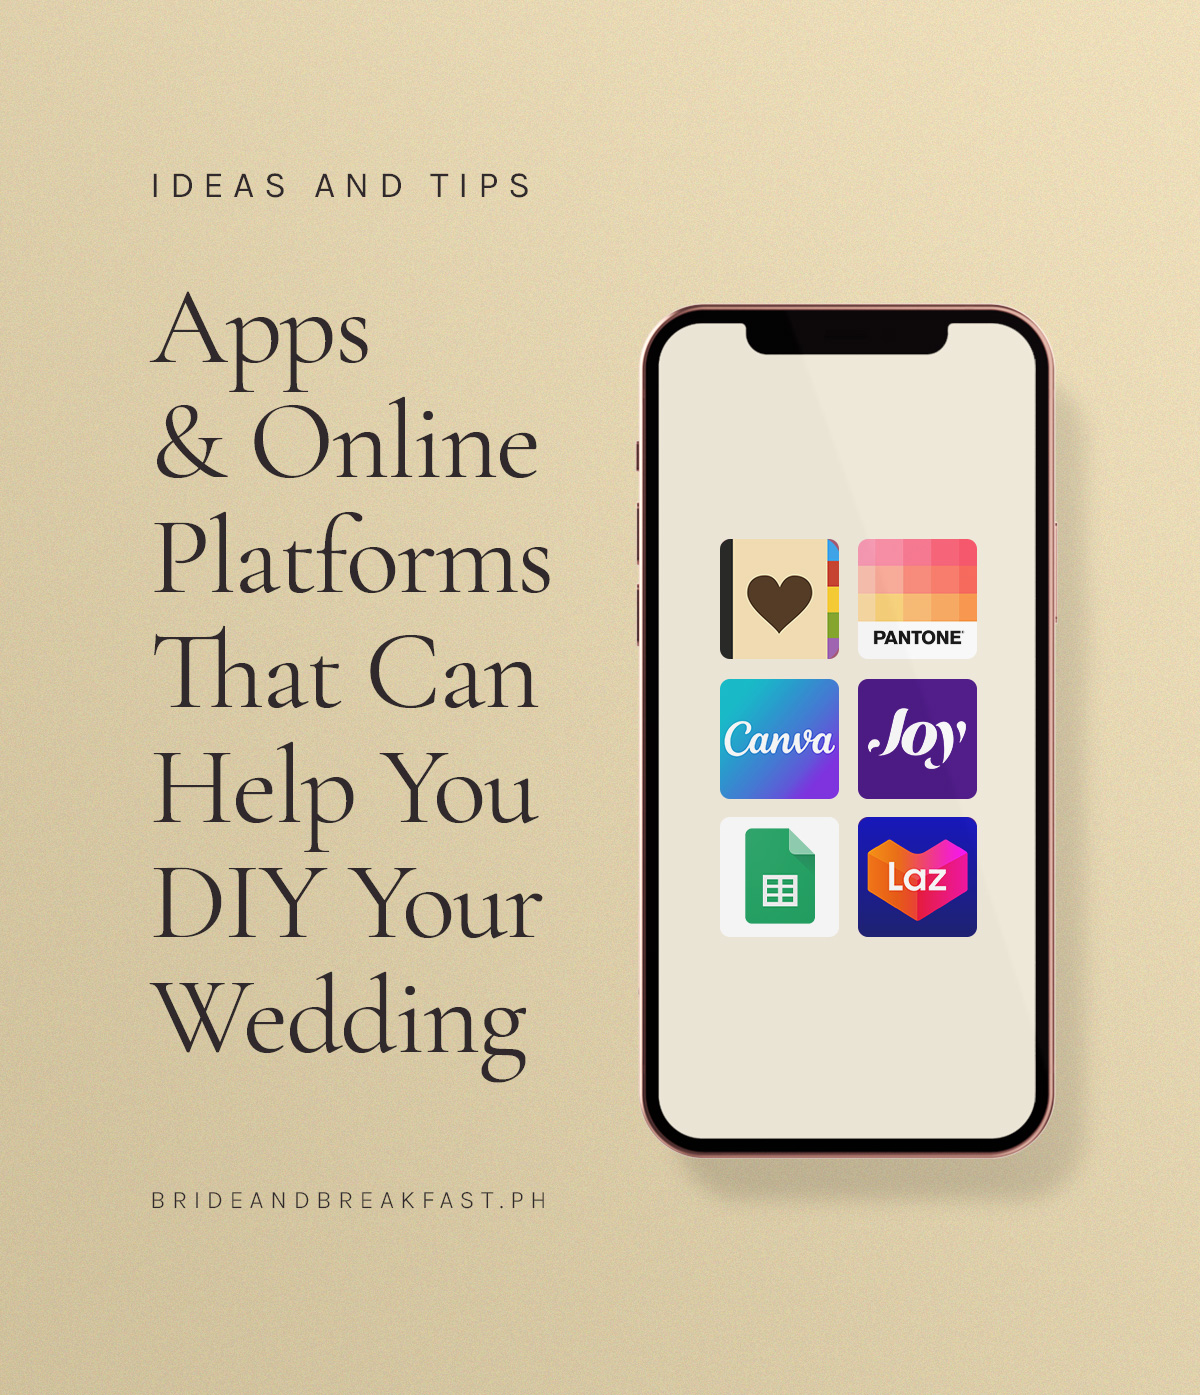 Apps and Online Platforms That Can Help You DIY Your Wedding 